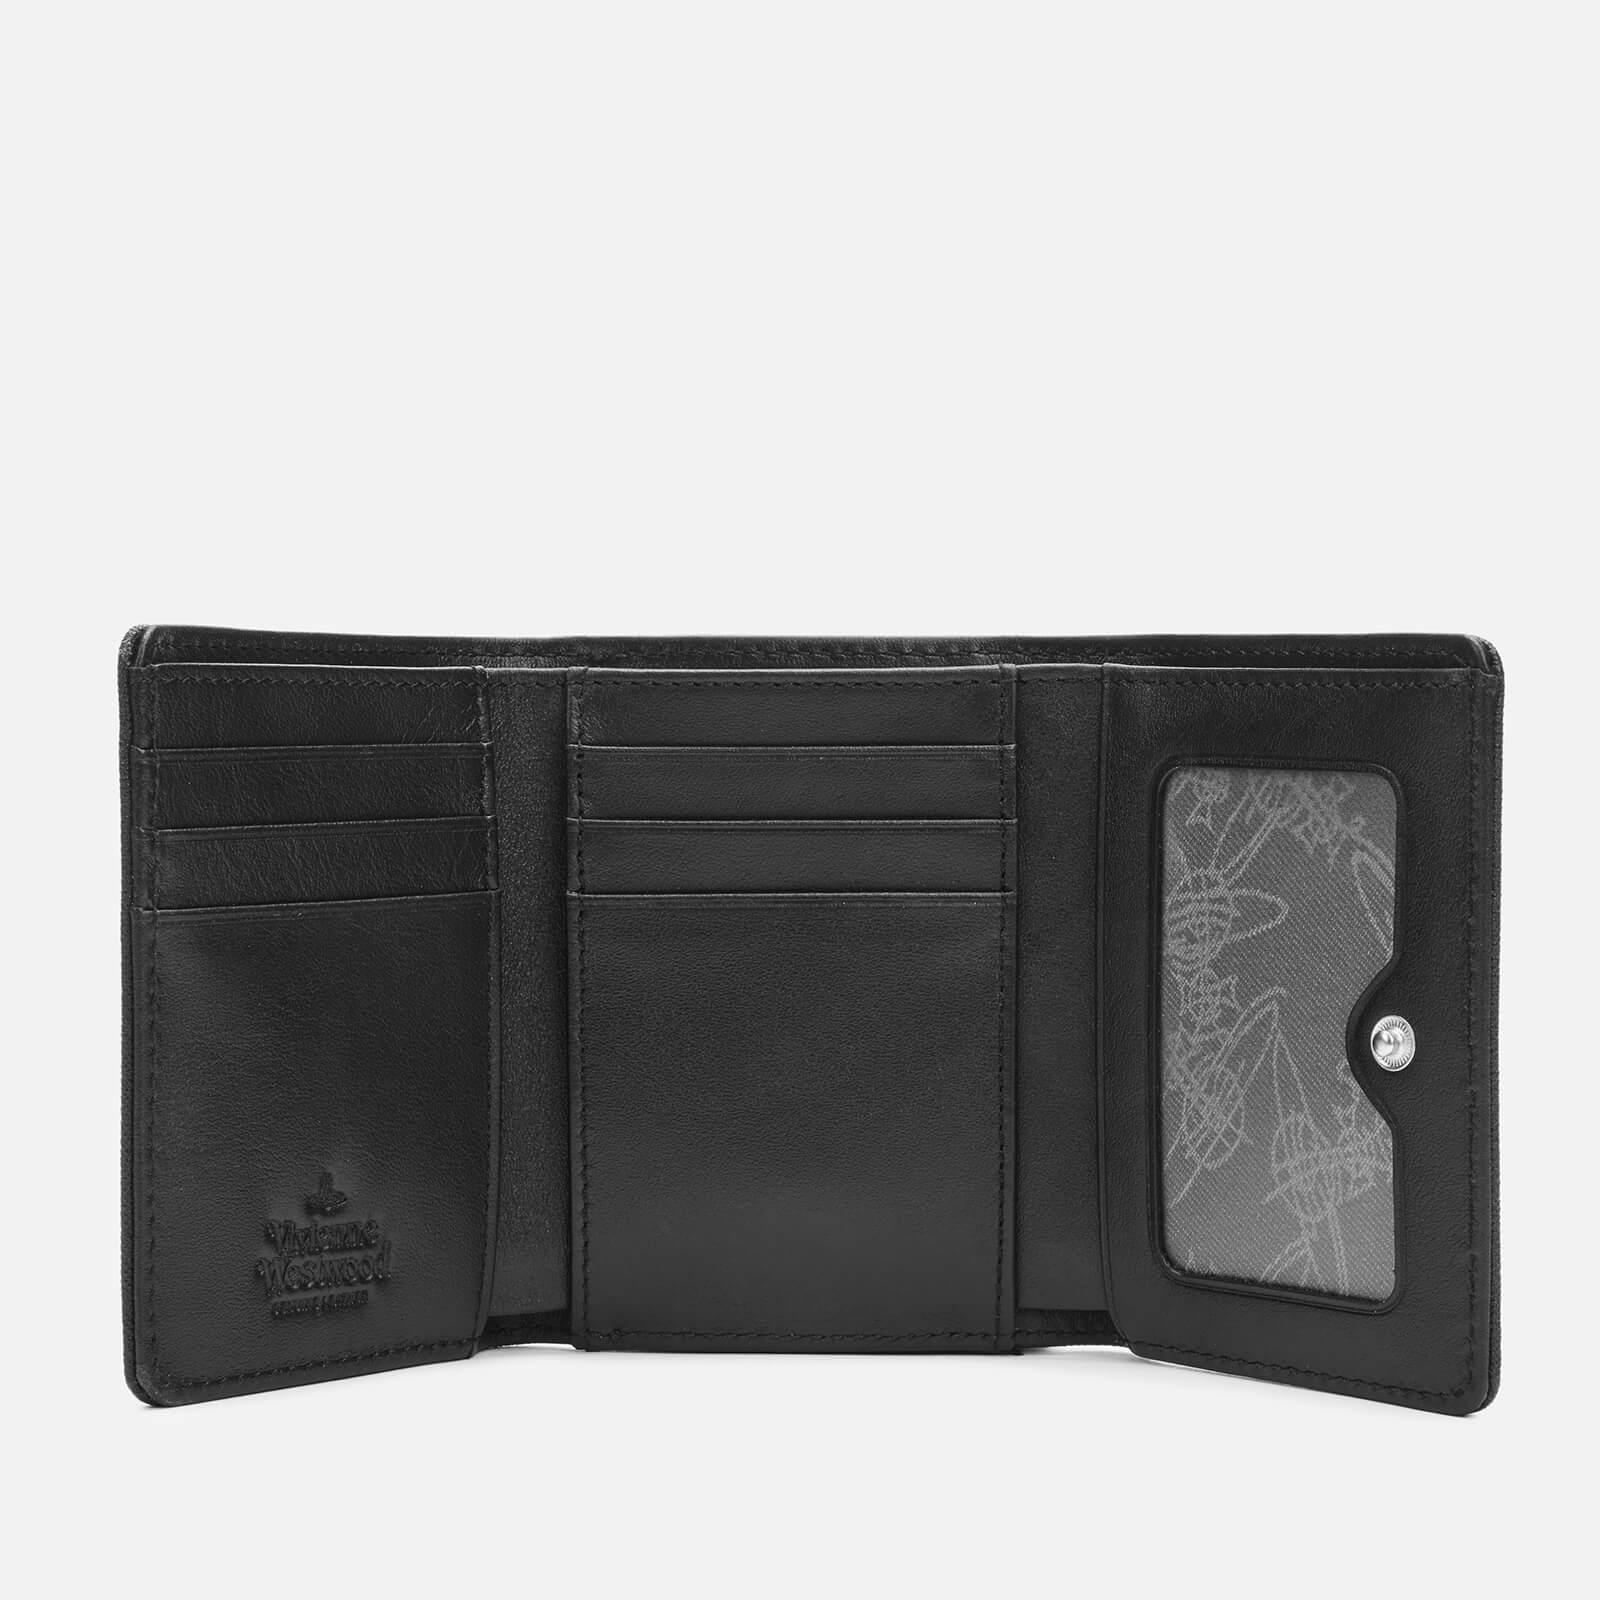 Vivienne Westwood Leather Victoria Small Frame Wallet in Black | Lyst